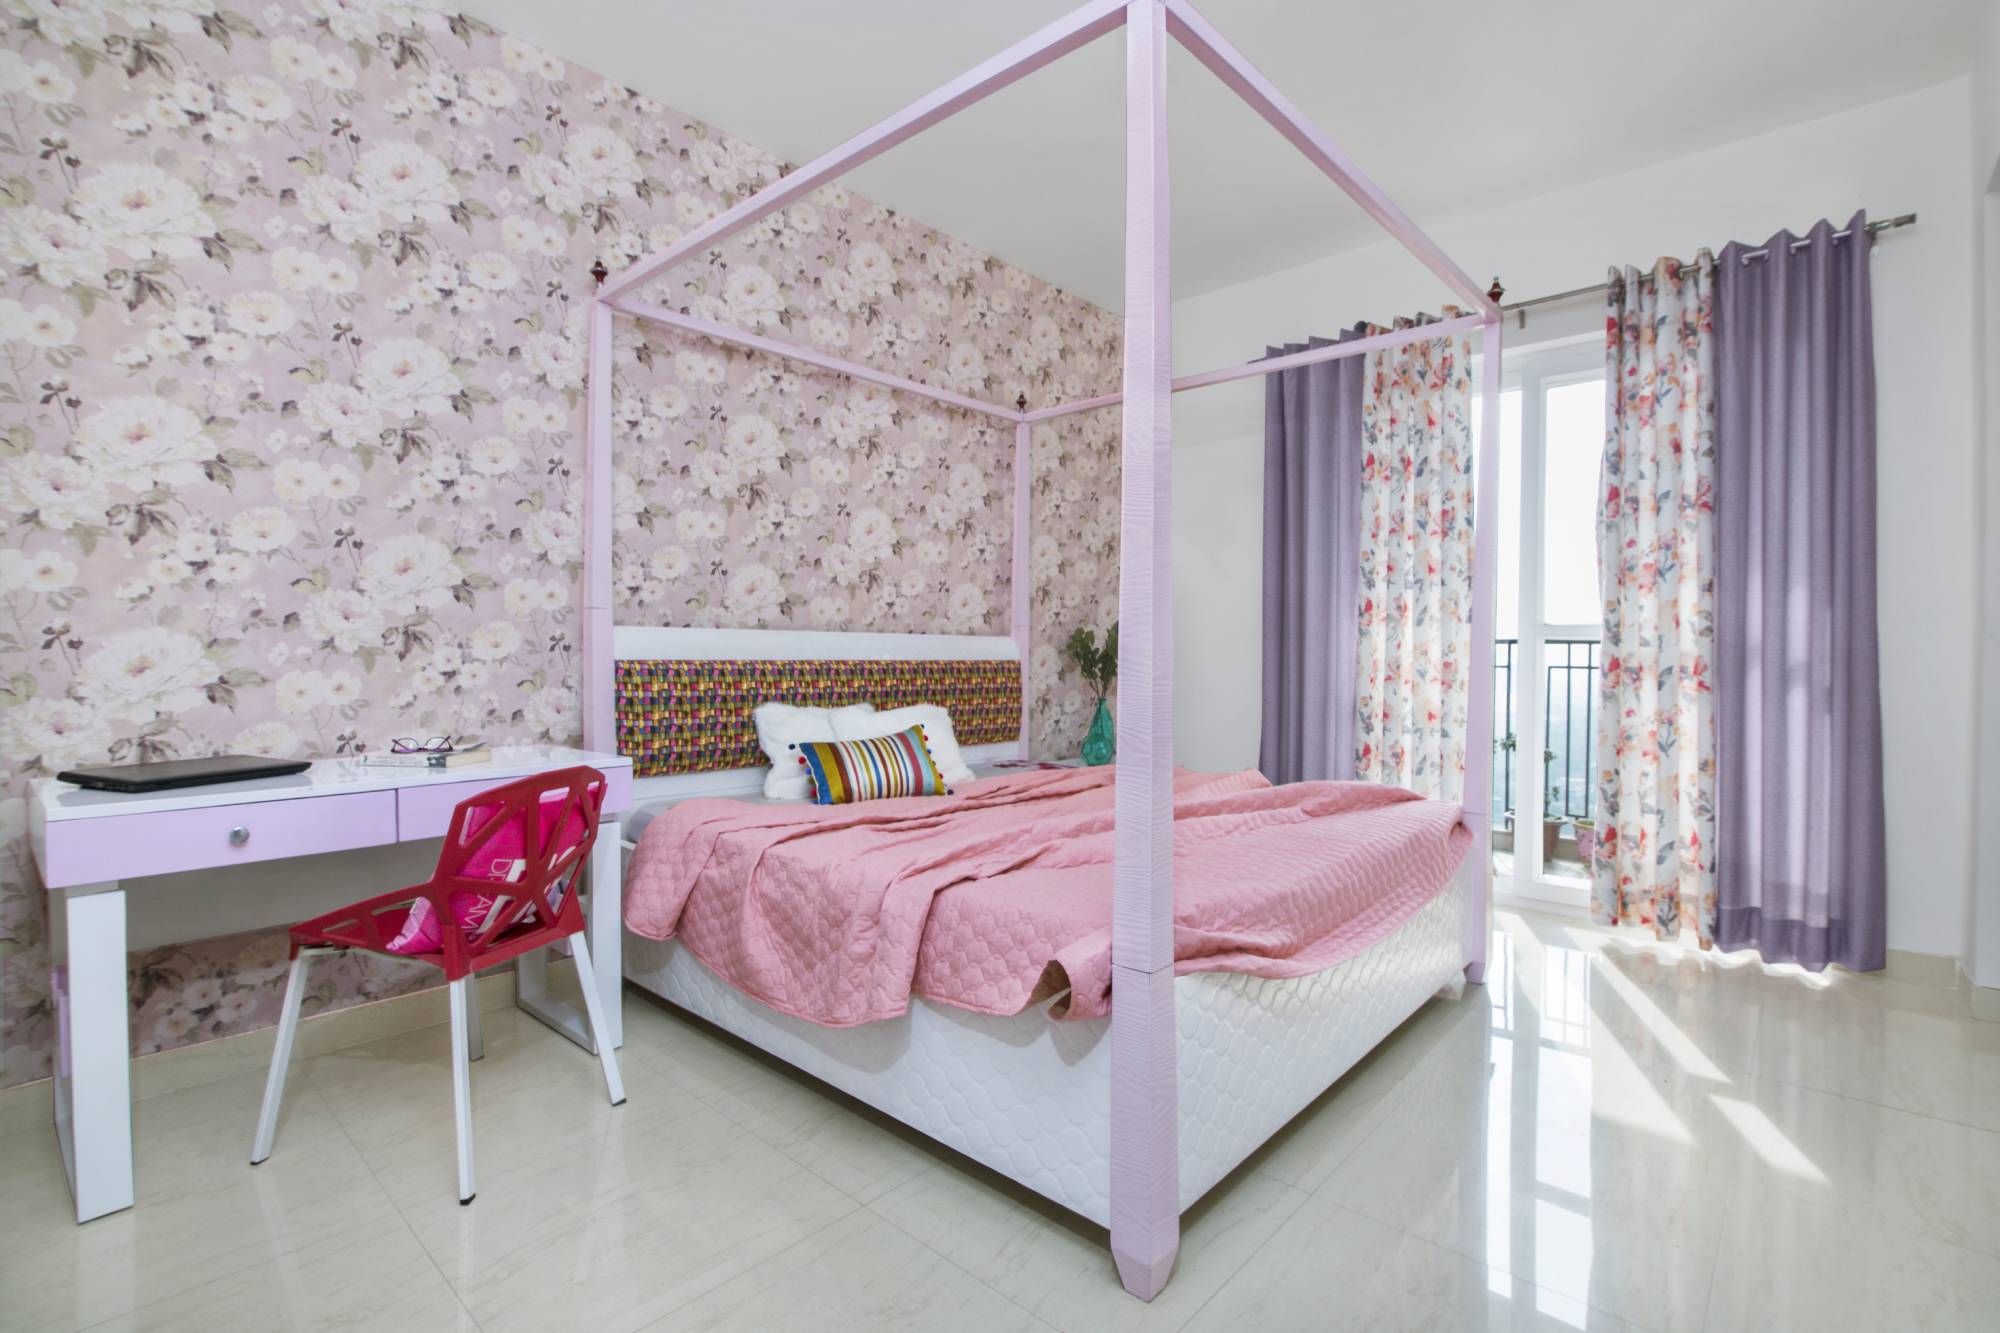 Modern Pink And White Kid's Room Design